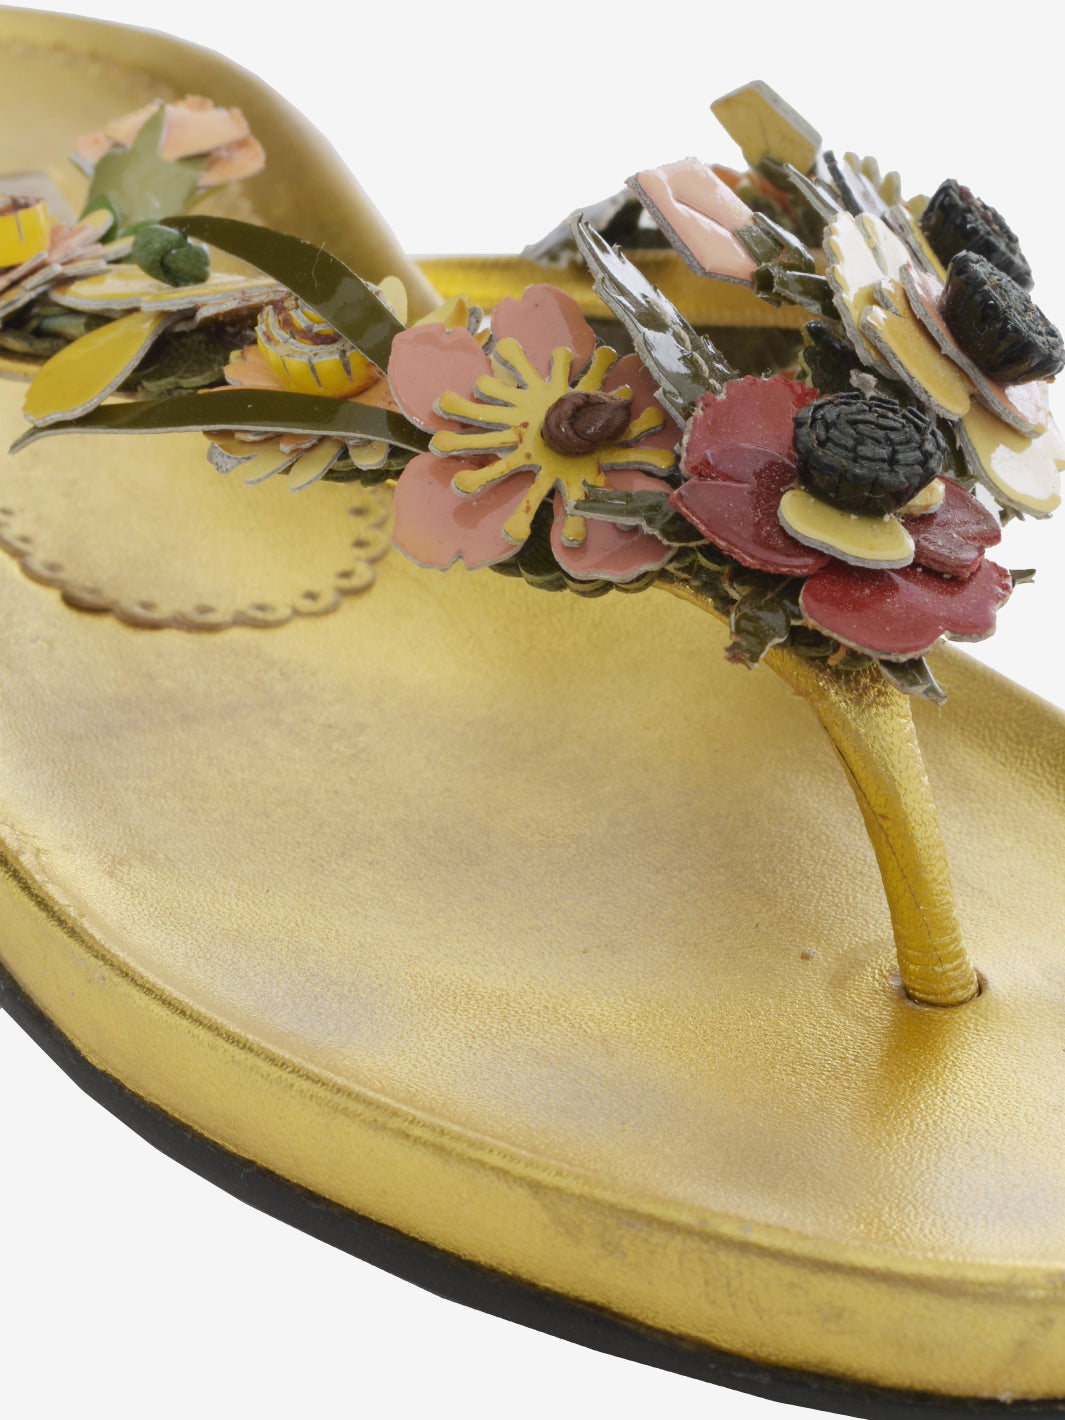 Prada Flip-flops With Leather Floral Apllications